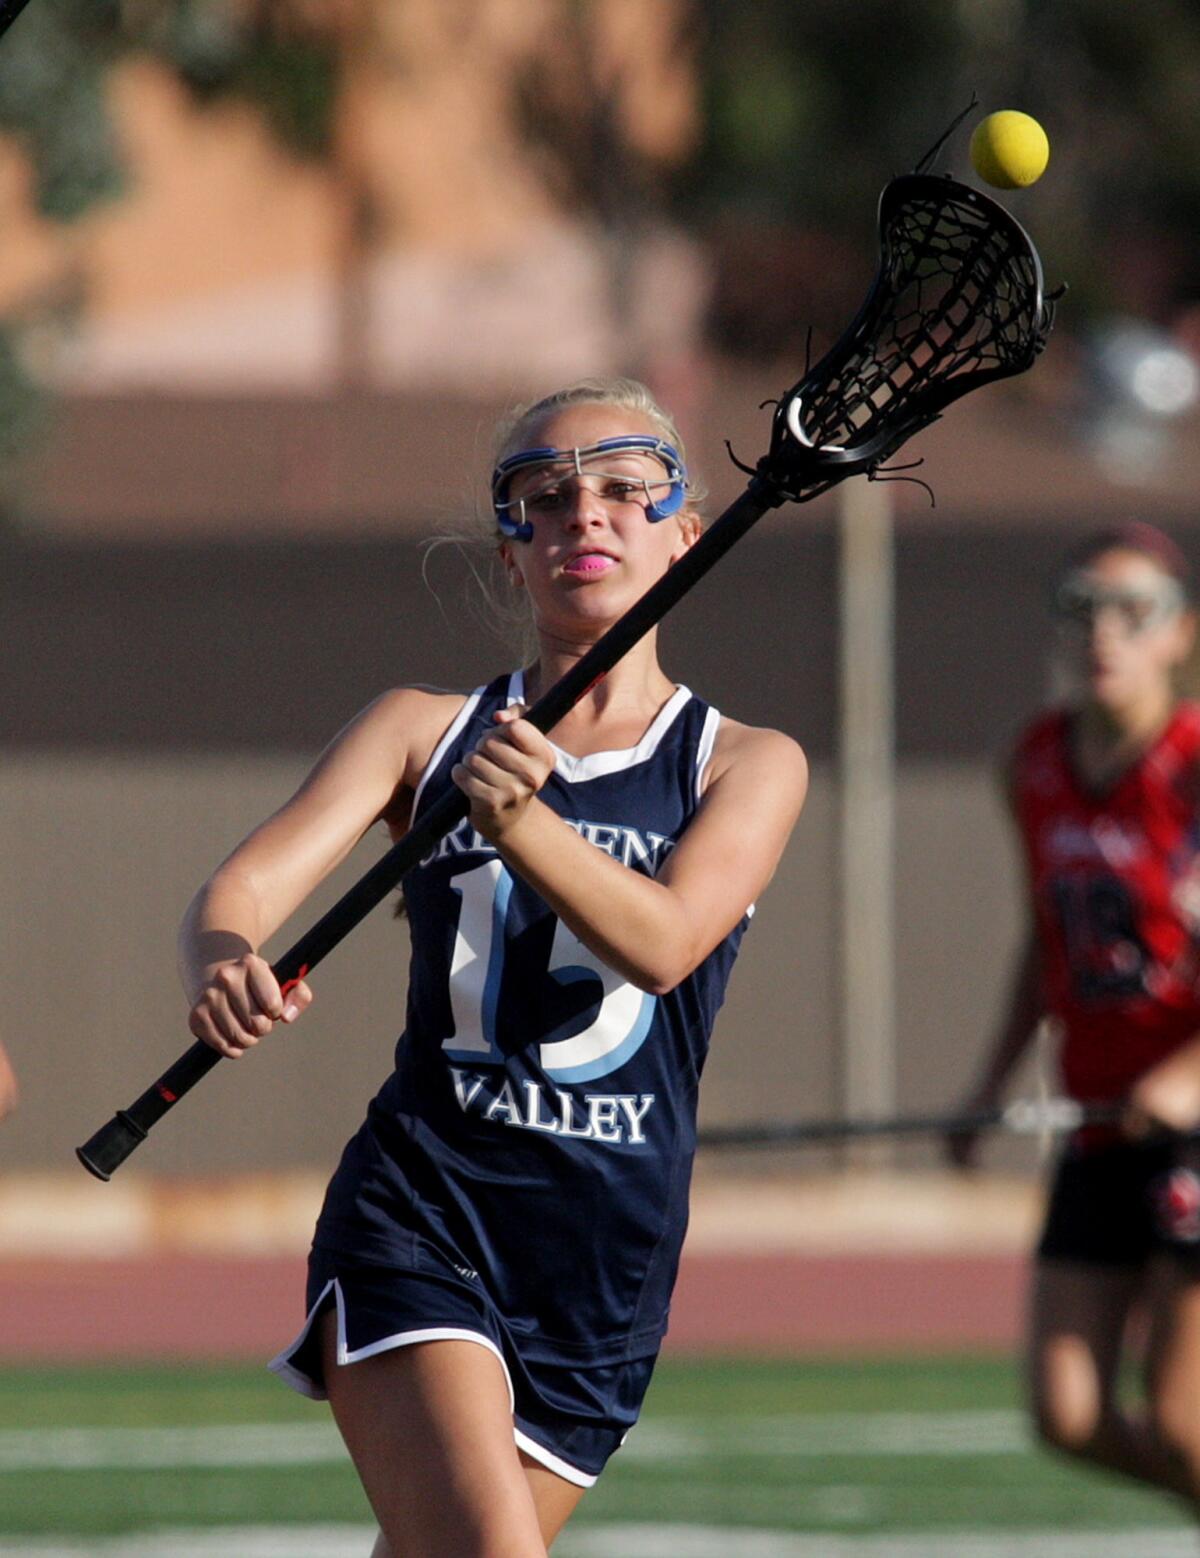 Crescenta Valley High junior attacker Leah Crowther and the Falcons girls' lacrosse team will be starting just its second season in 2015.